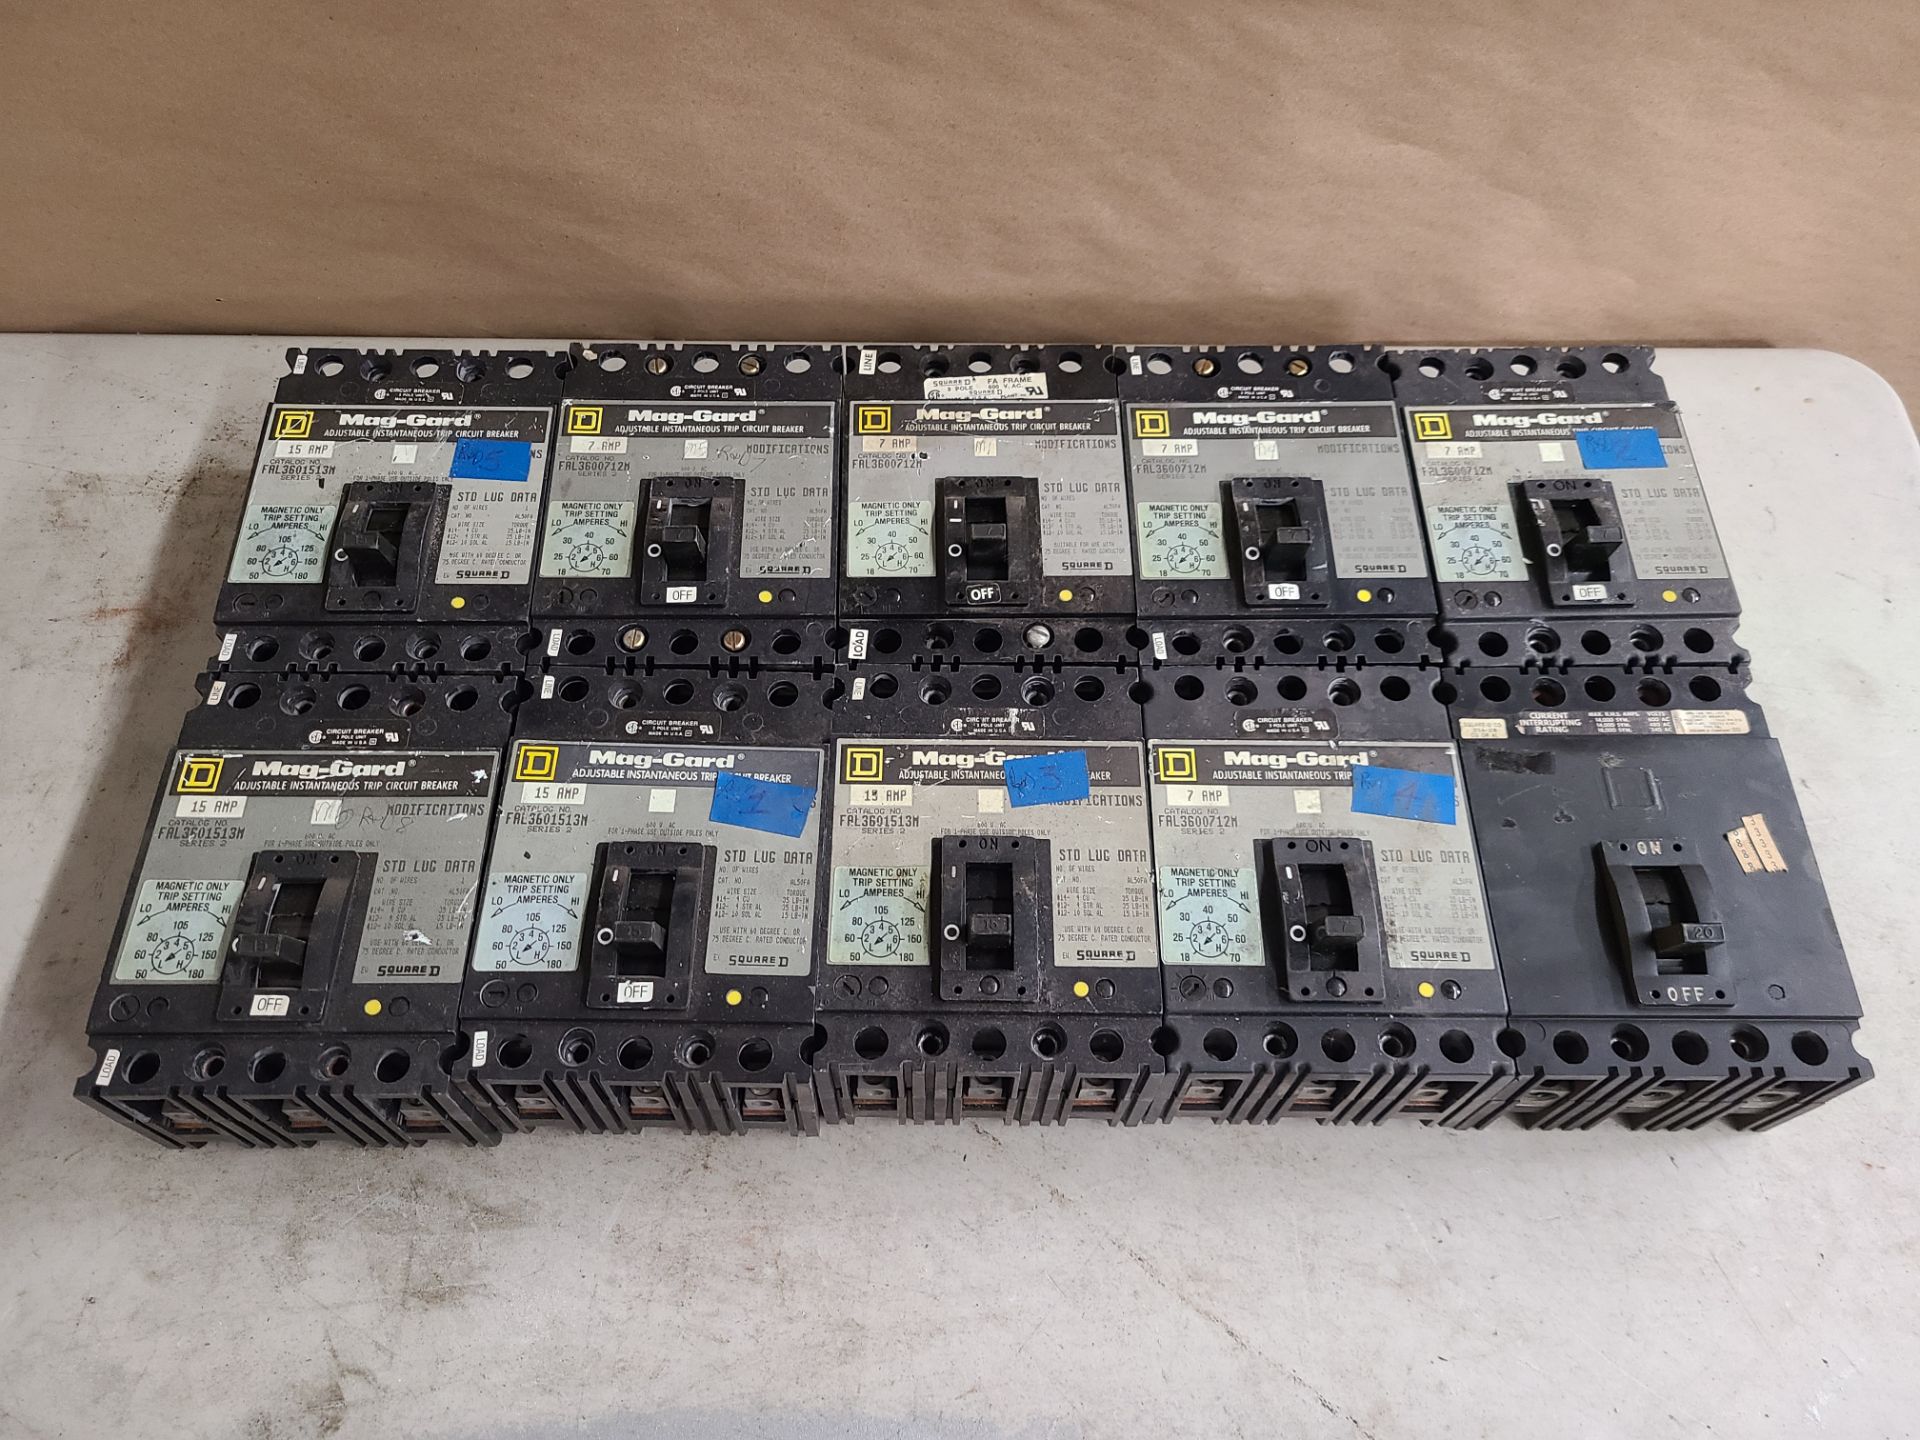 LOT OF SQUARE D MAG-GARD INDUSTRIAL MOLDED CASE CIRCUIT BREAKERS